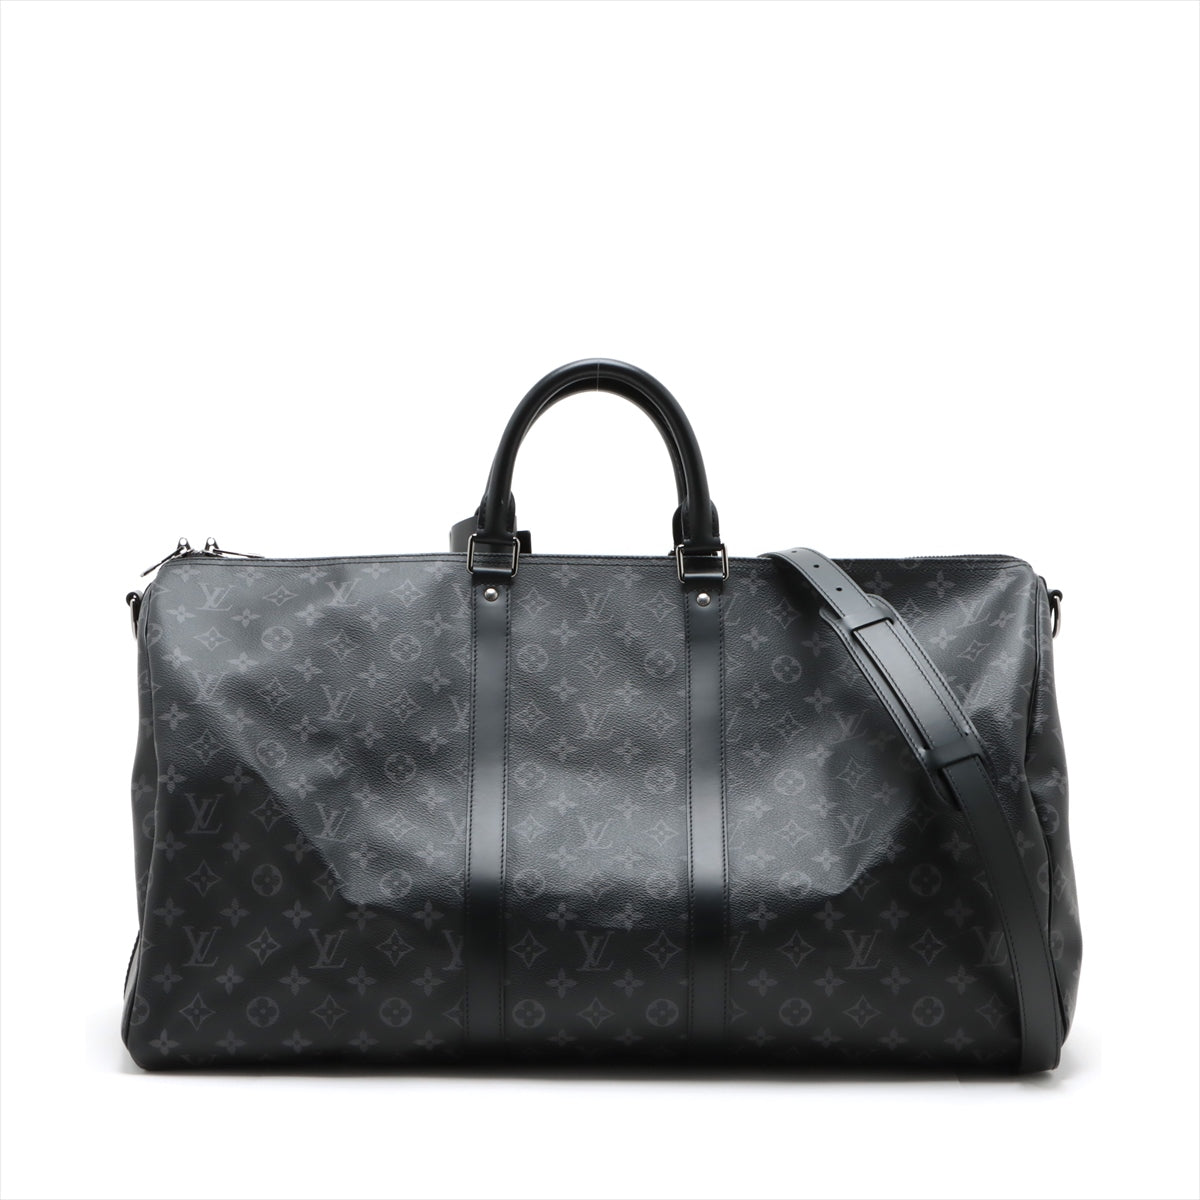 Louis Vuitton Monogram Eclipse Keepall Bandrière 55 M40605 There was an RFID response